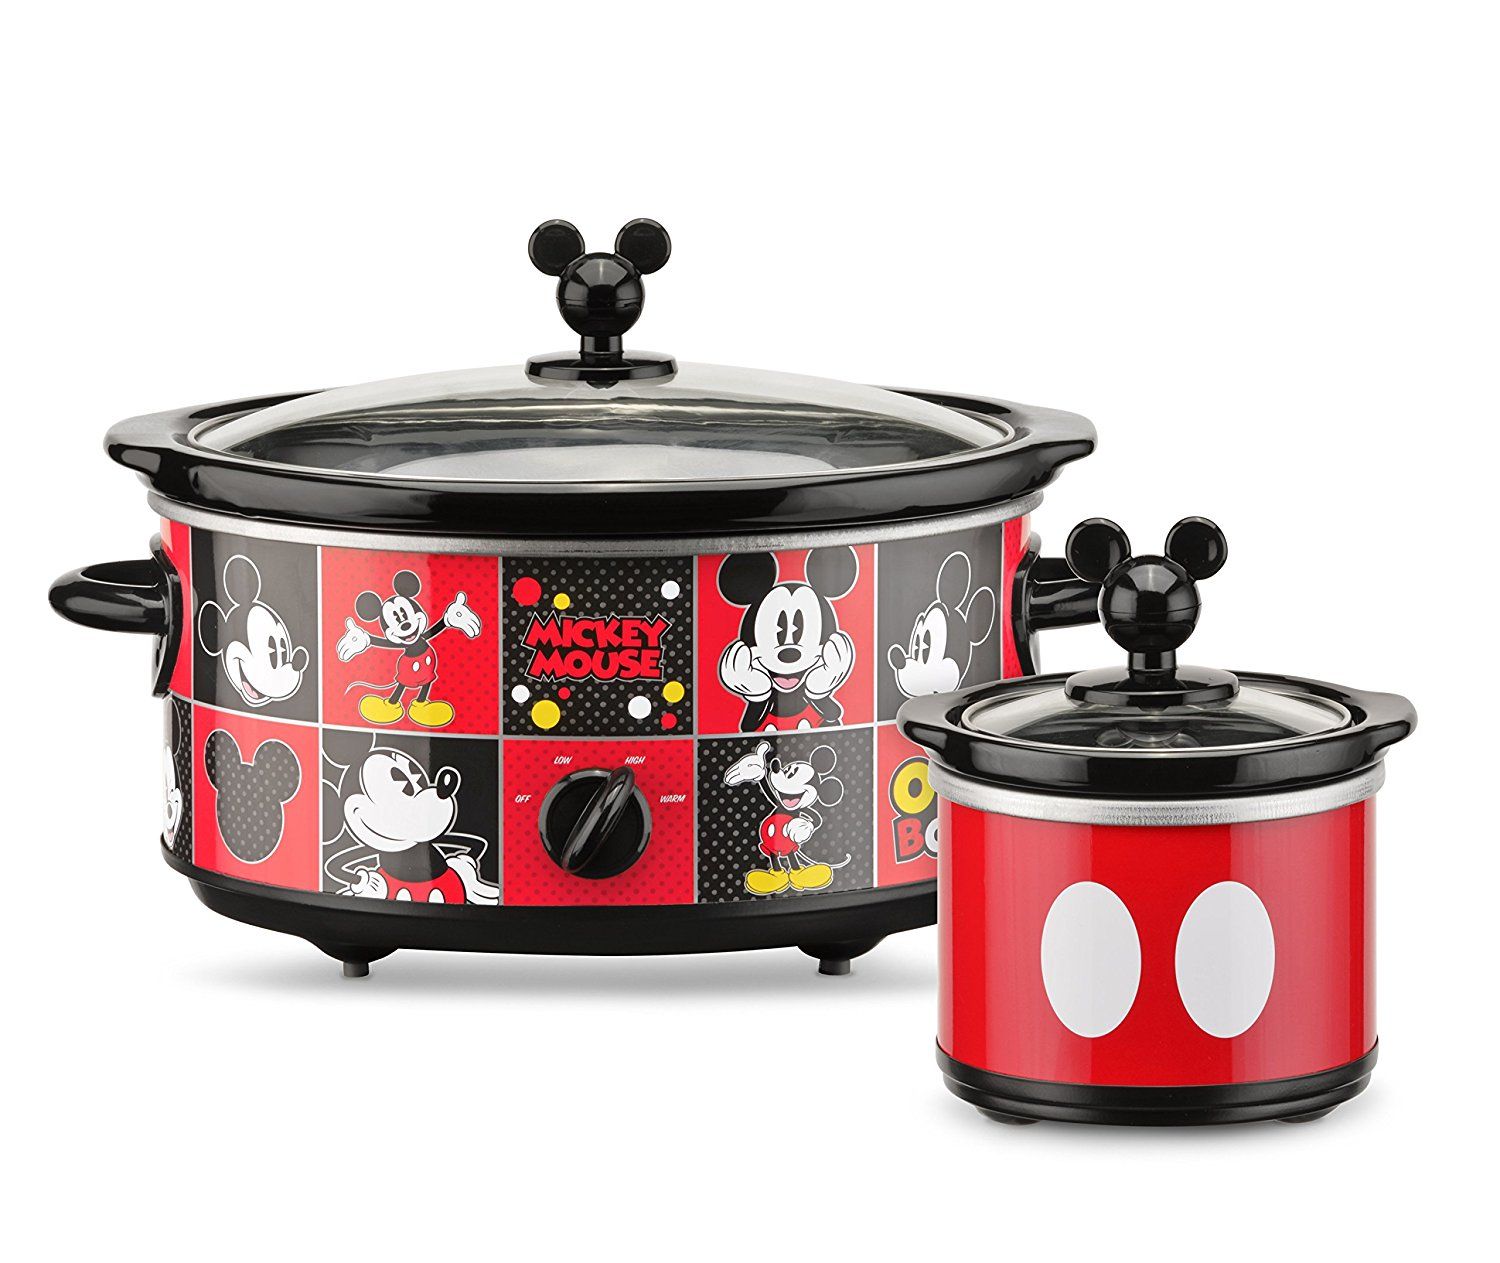 55 Best Disney Gifts to Shop in 2023, Per a Disney Adult